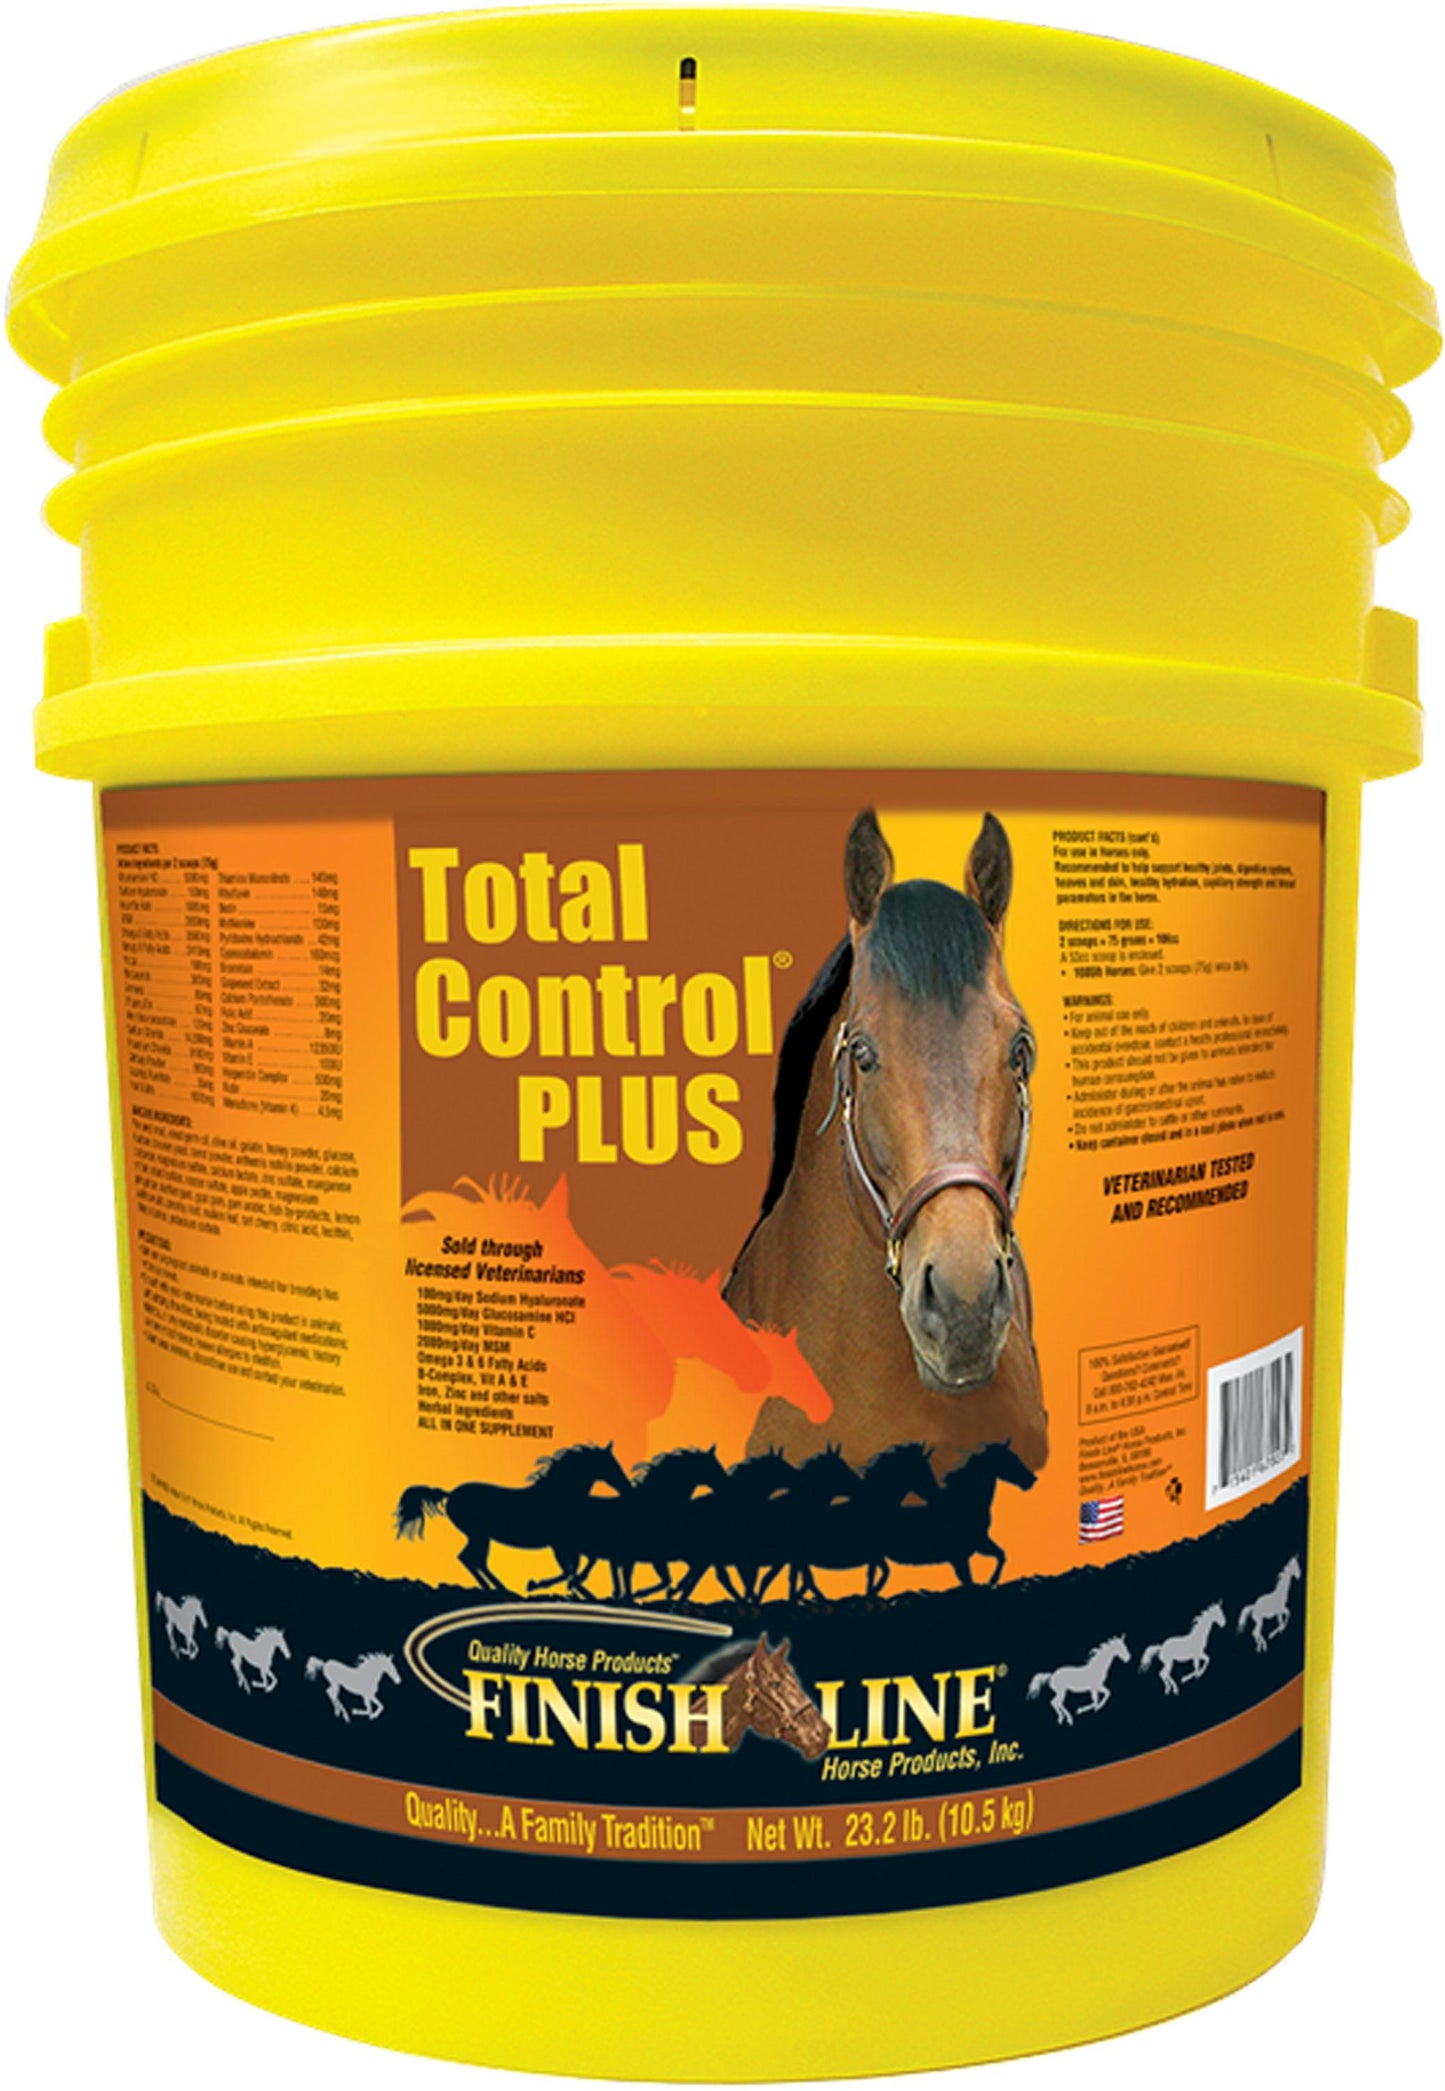 Total Control Plus 7 In 1 - aomega-products